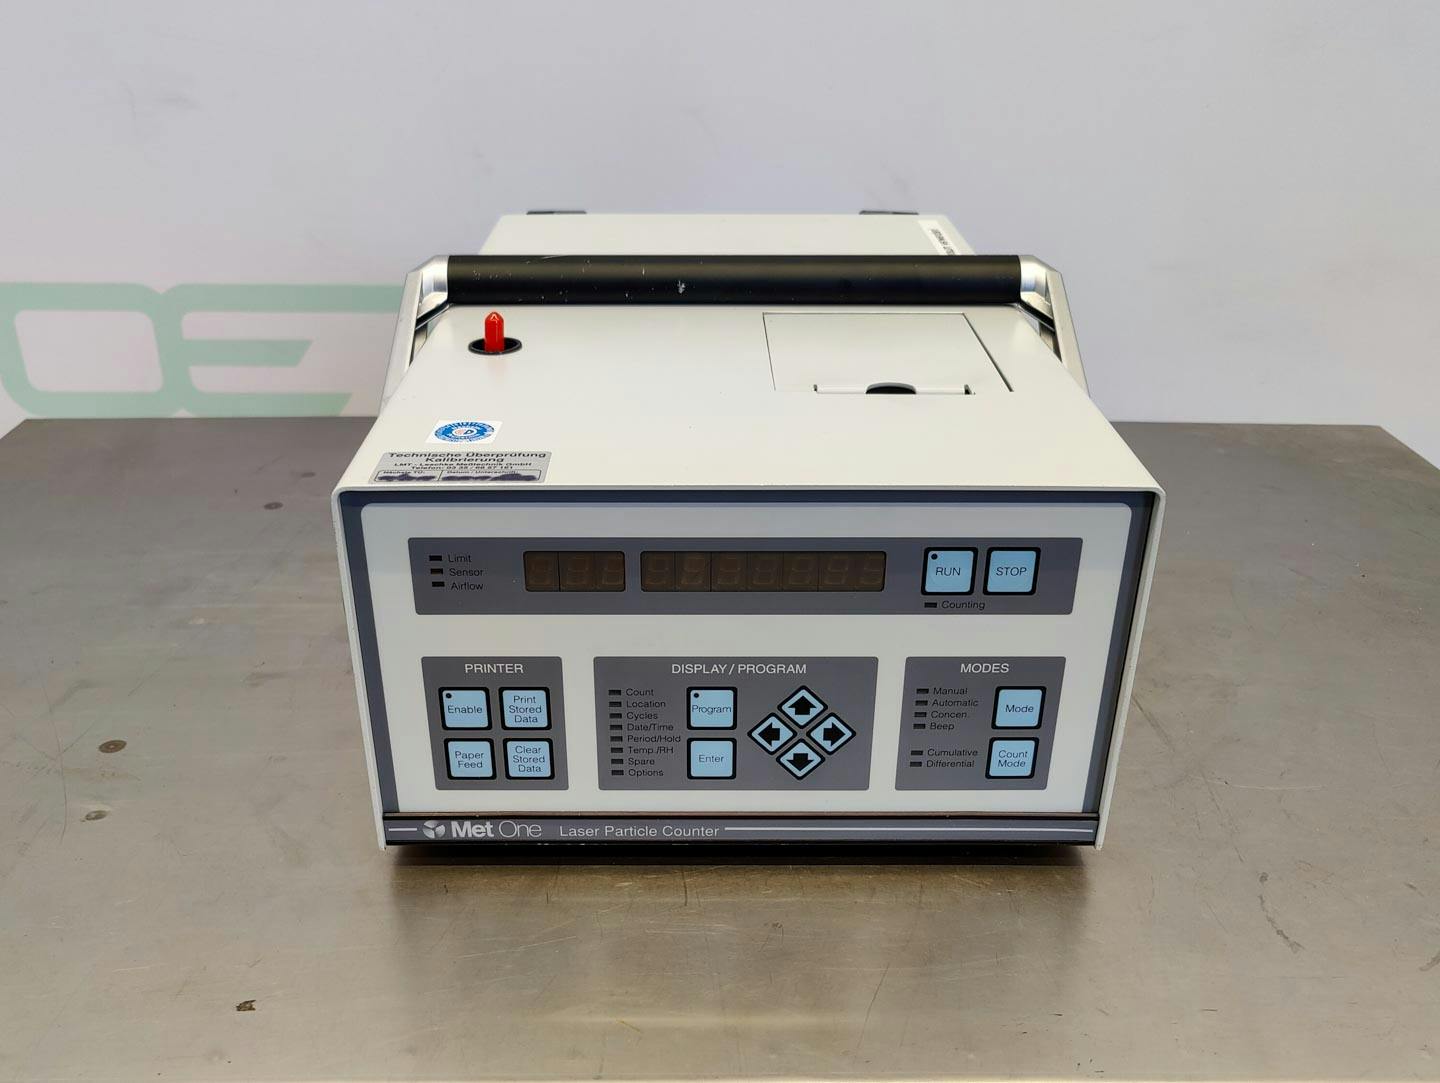 Met One A2408 "laser particle counter" - Diversen